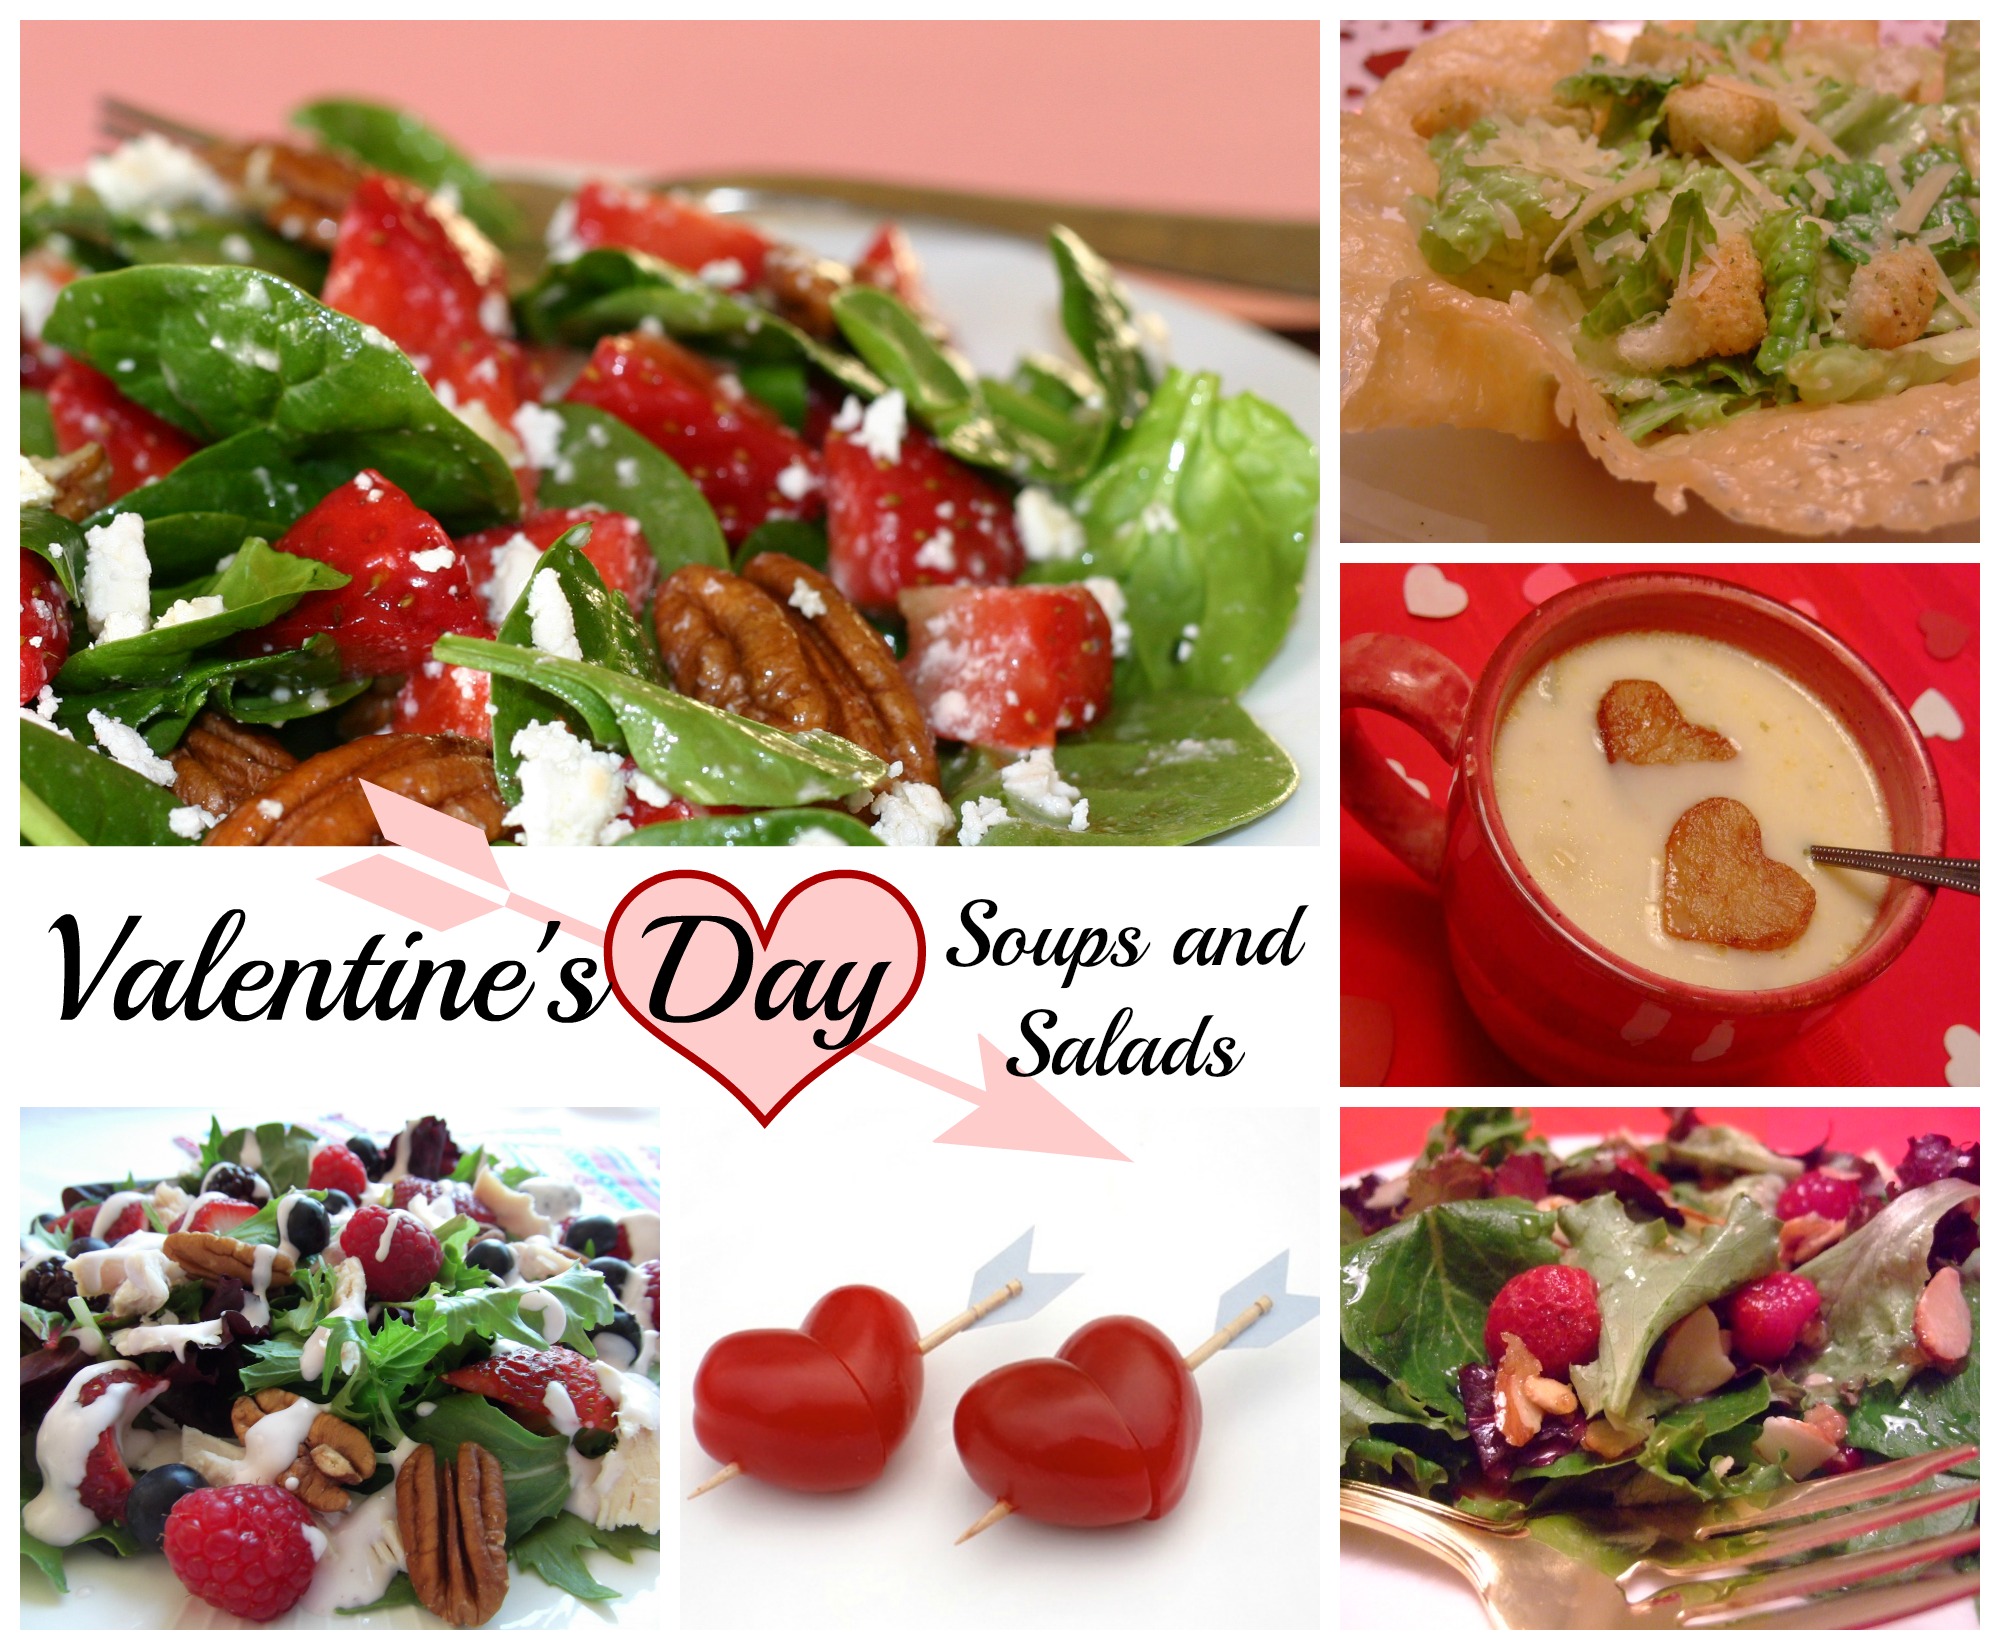 Valentine’s Day Soup and Salad Ideas and Recipes